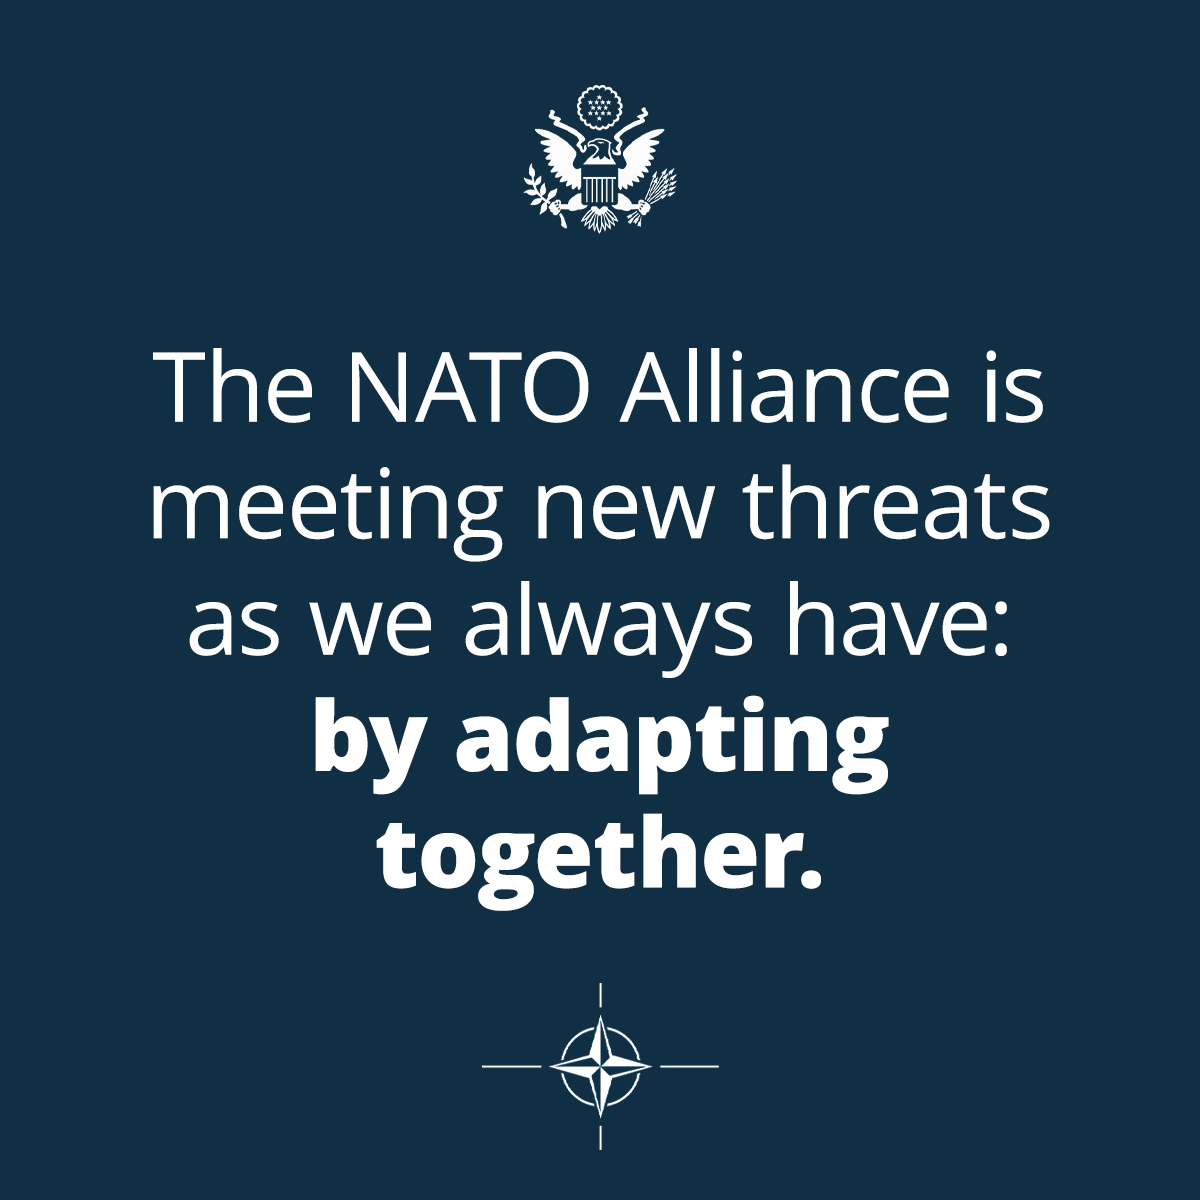 Even as our Alliance changes, even as it evolves, its purpose remains enduring. Ours is a defensive Alliance. It’s never had and it never will have designs on the territory of any other country. — @SecBlinken